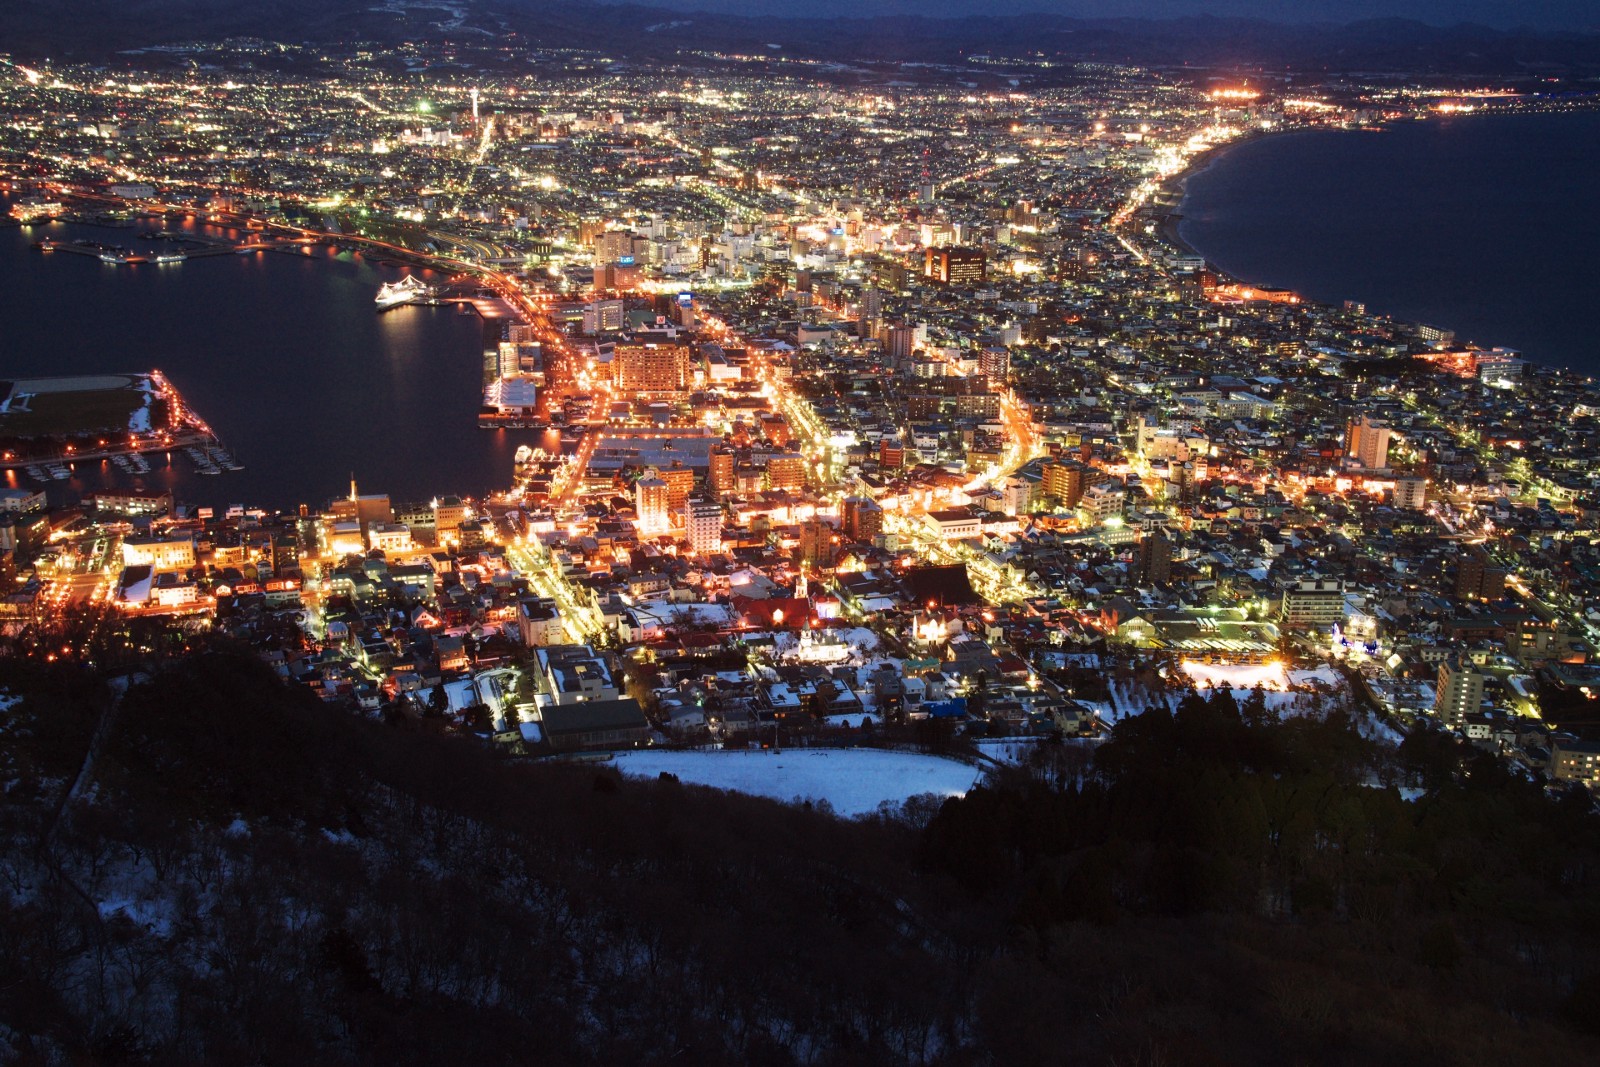 The astonishing night view of the city from Mt Hakodate